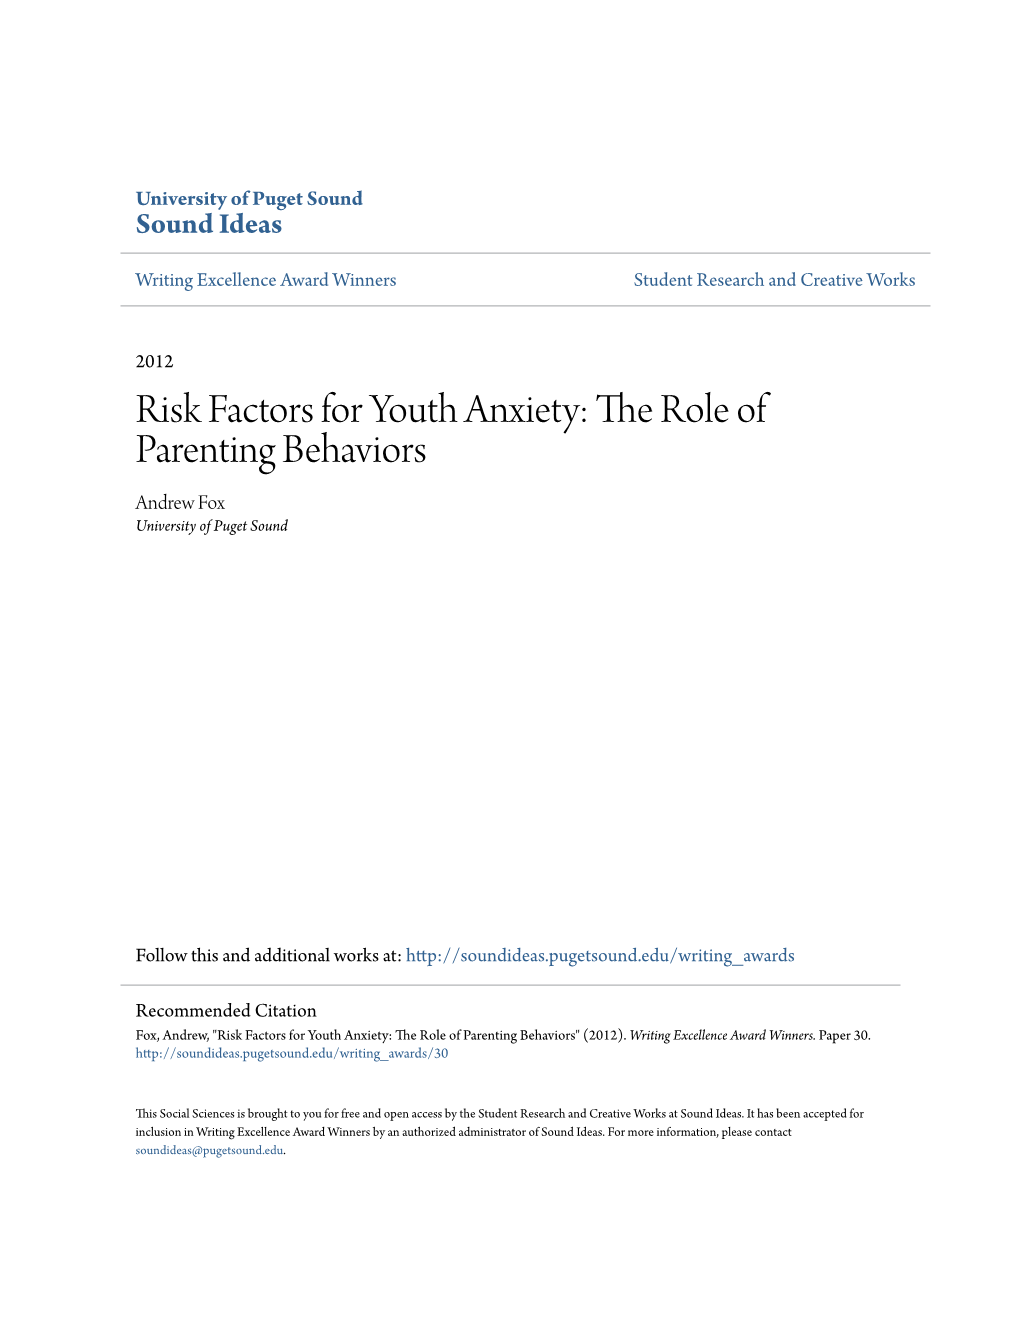 Risk Factors for Youth Anxiety: the Role of Parenting Behaviors Andrew Fox University of Puget Sound